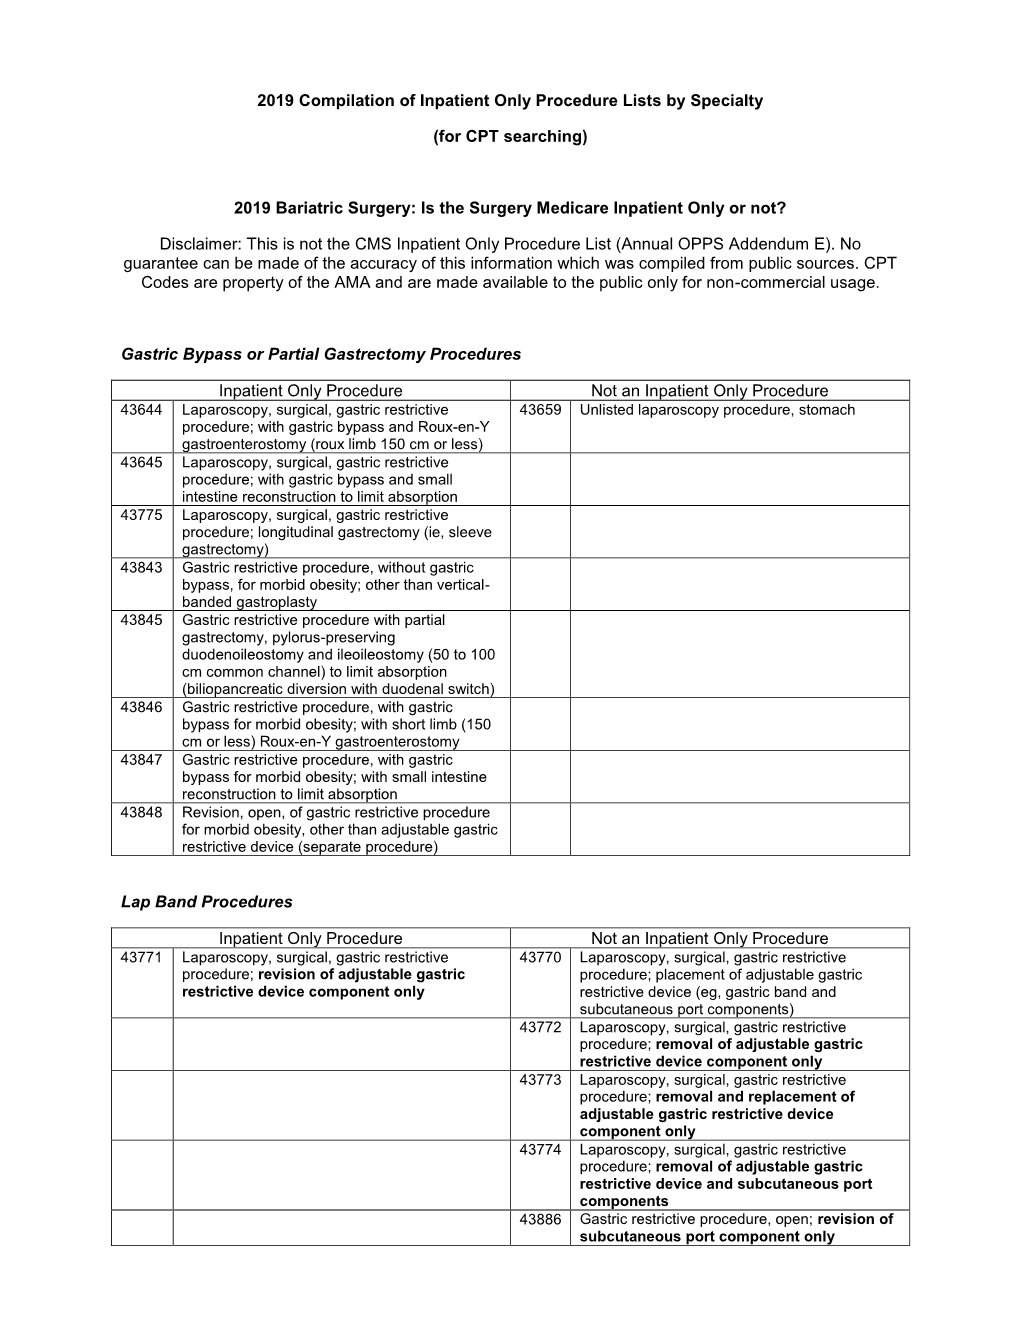 2019 Compilation of Inpatient Only Procedure Lists by Specialty DocsLib